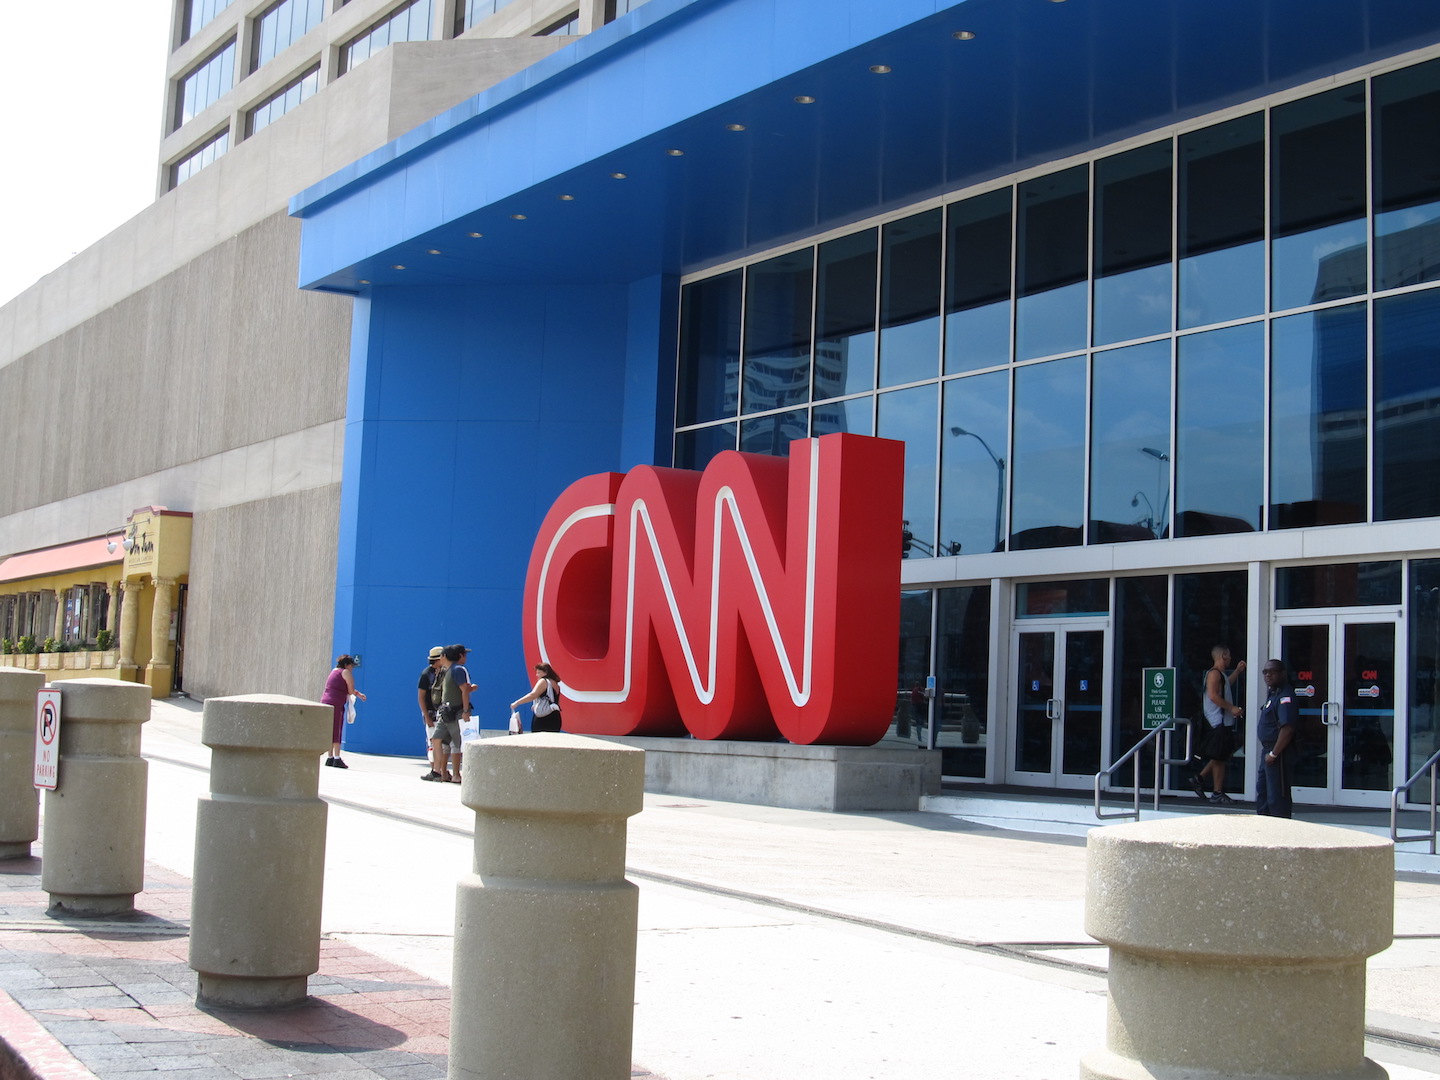 CNN kicked out of Venezuela after being accused of spreading “fake news” … does it get any funnier?